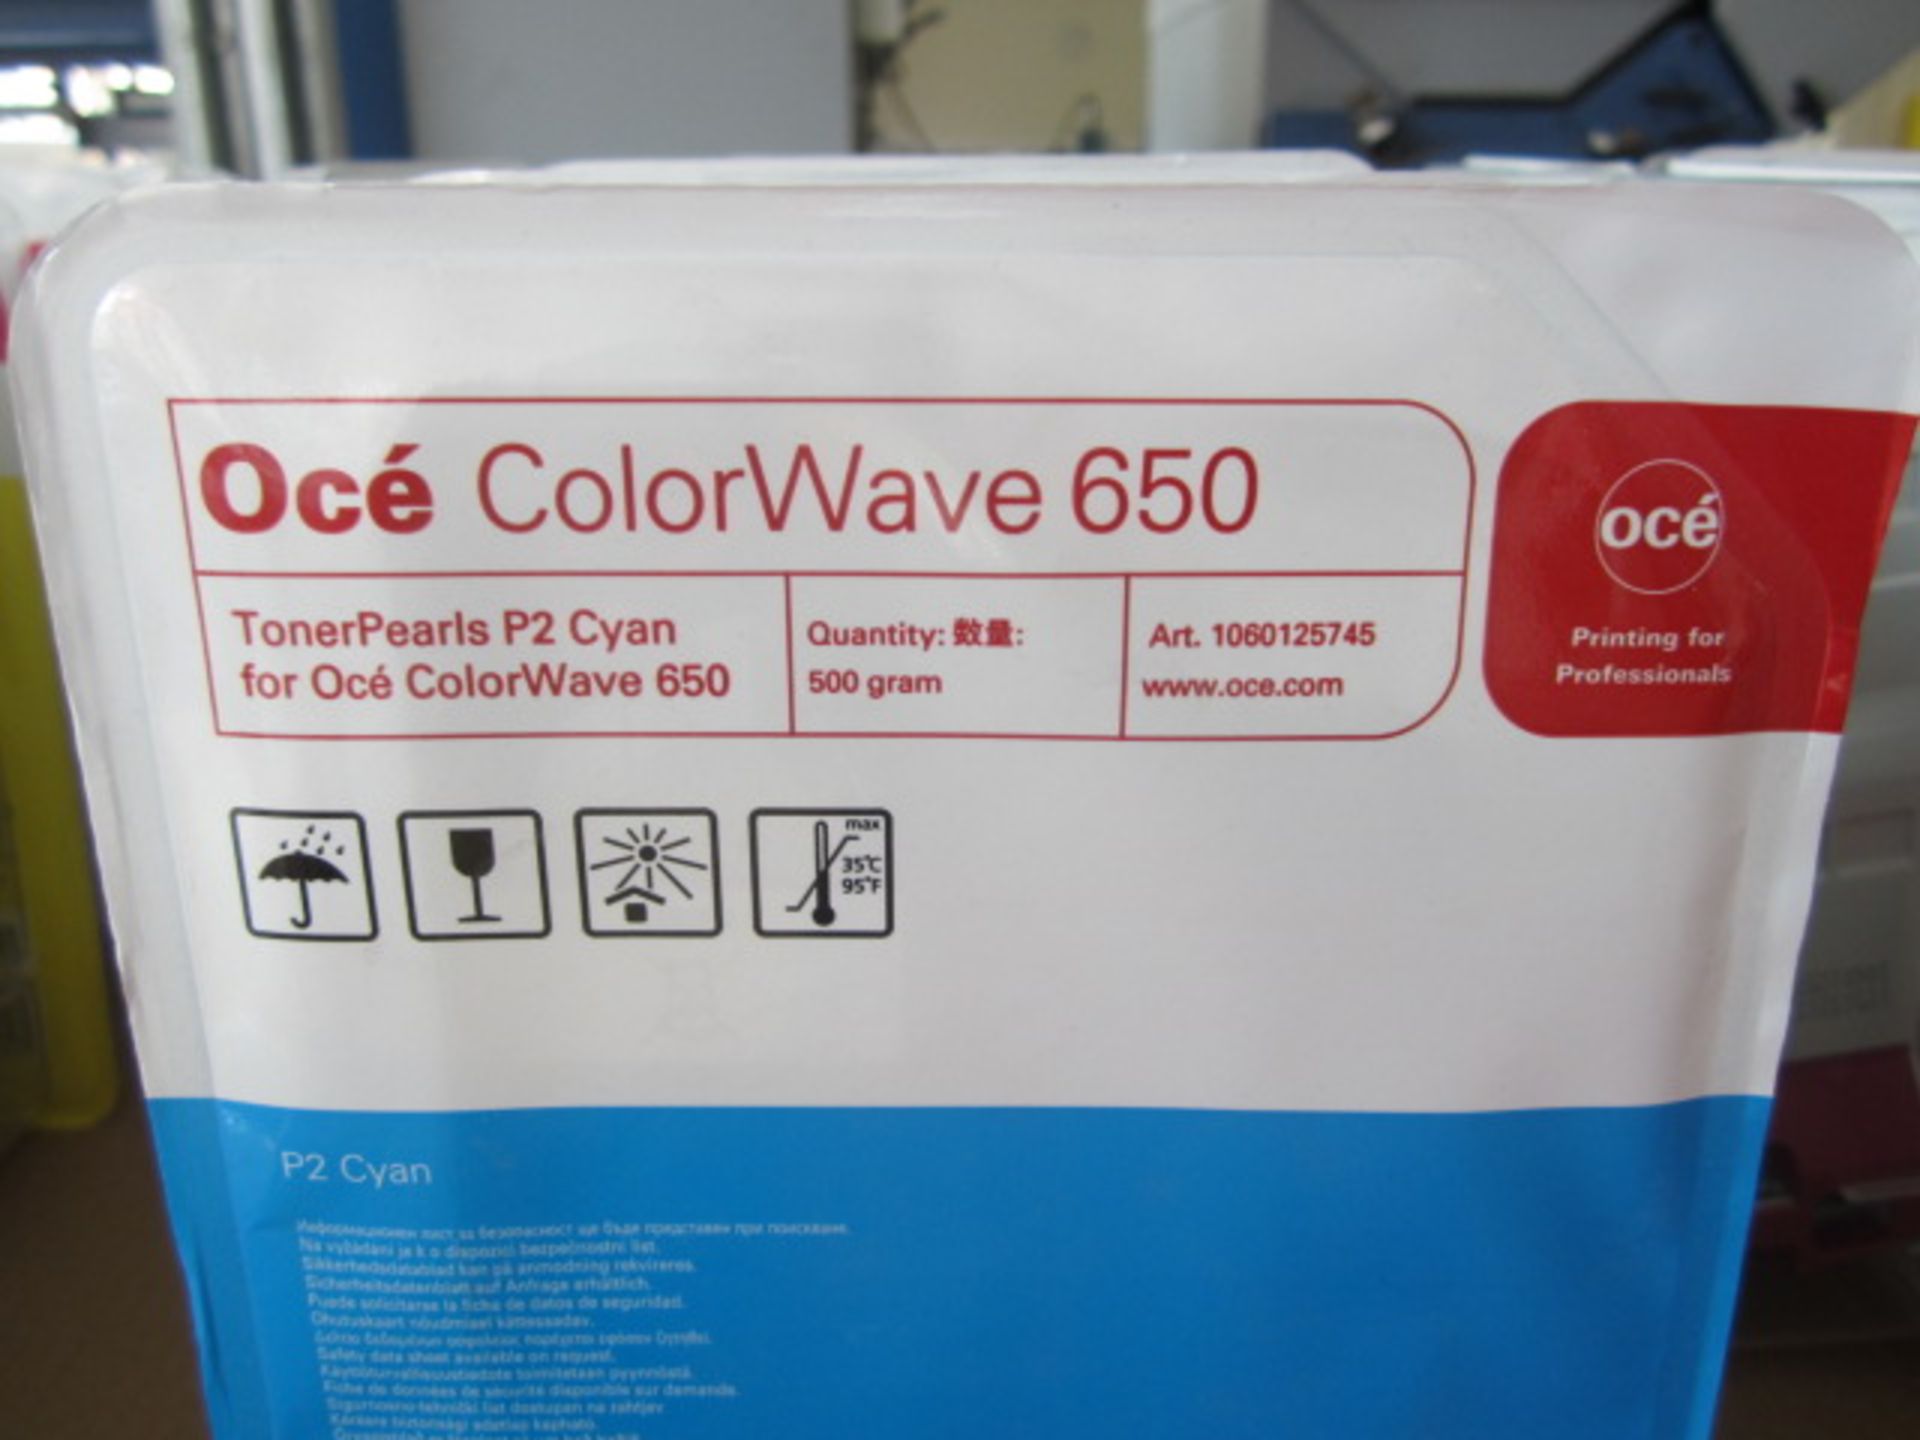 Oce Colorwave 650 Toner Pearl P2 including: 7 x Yellow, 6 x Cyan, 4 x Magenta, 6 x Black. - Lift out - Image 3 of 5